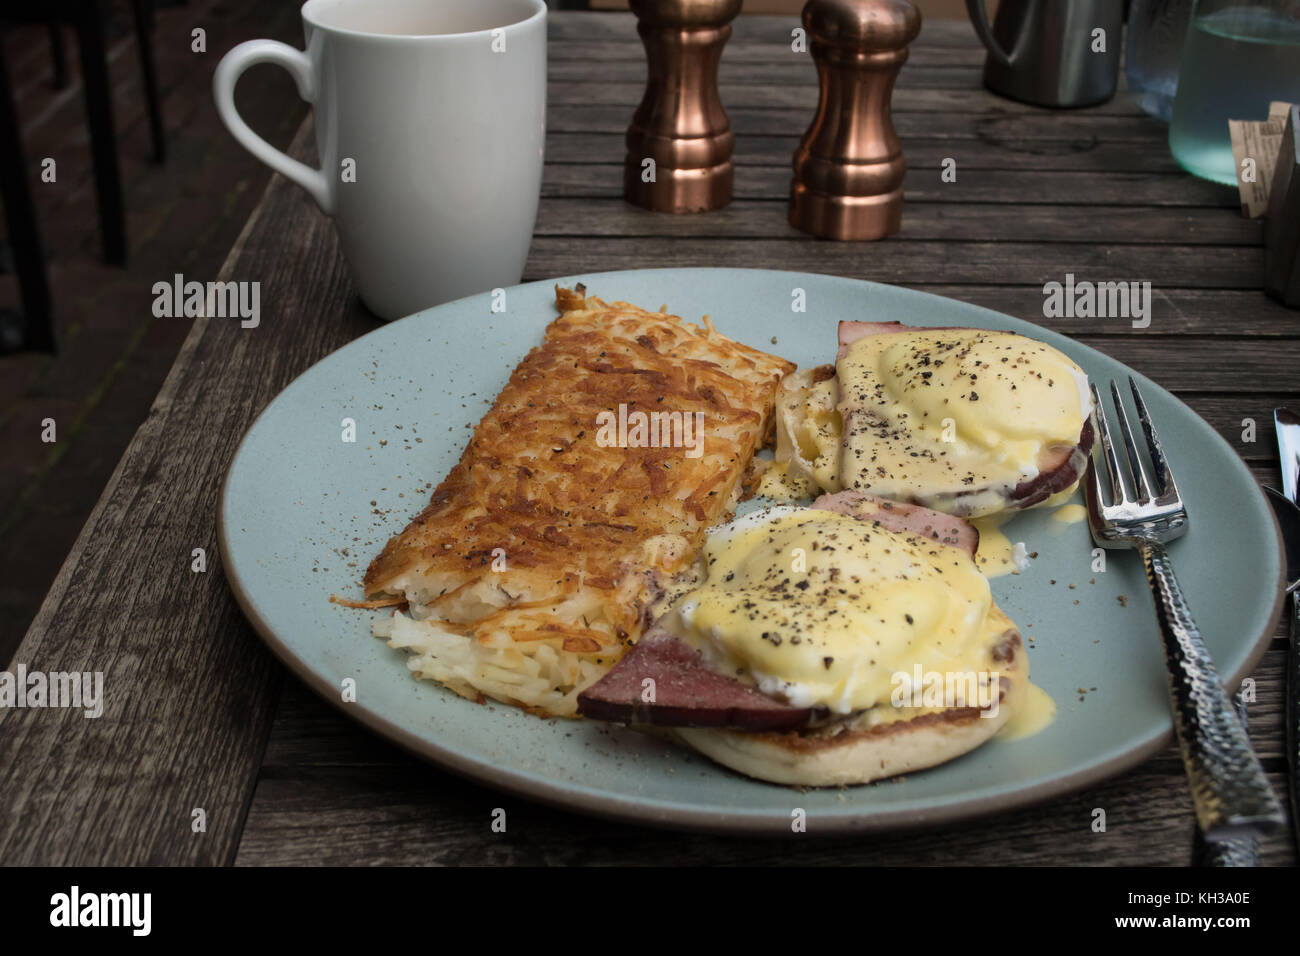 Casual breakfast of Eggs Benedict an outdoor cafe. Traditional place setting with cloth napkin, copper fixtures and a hot cup of coffee- delicious Stock Photo